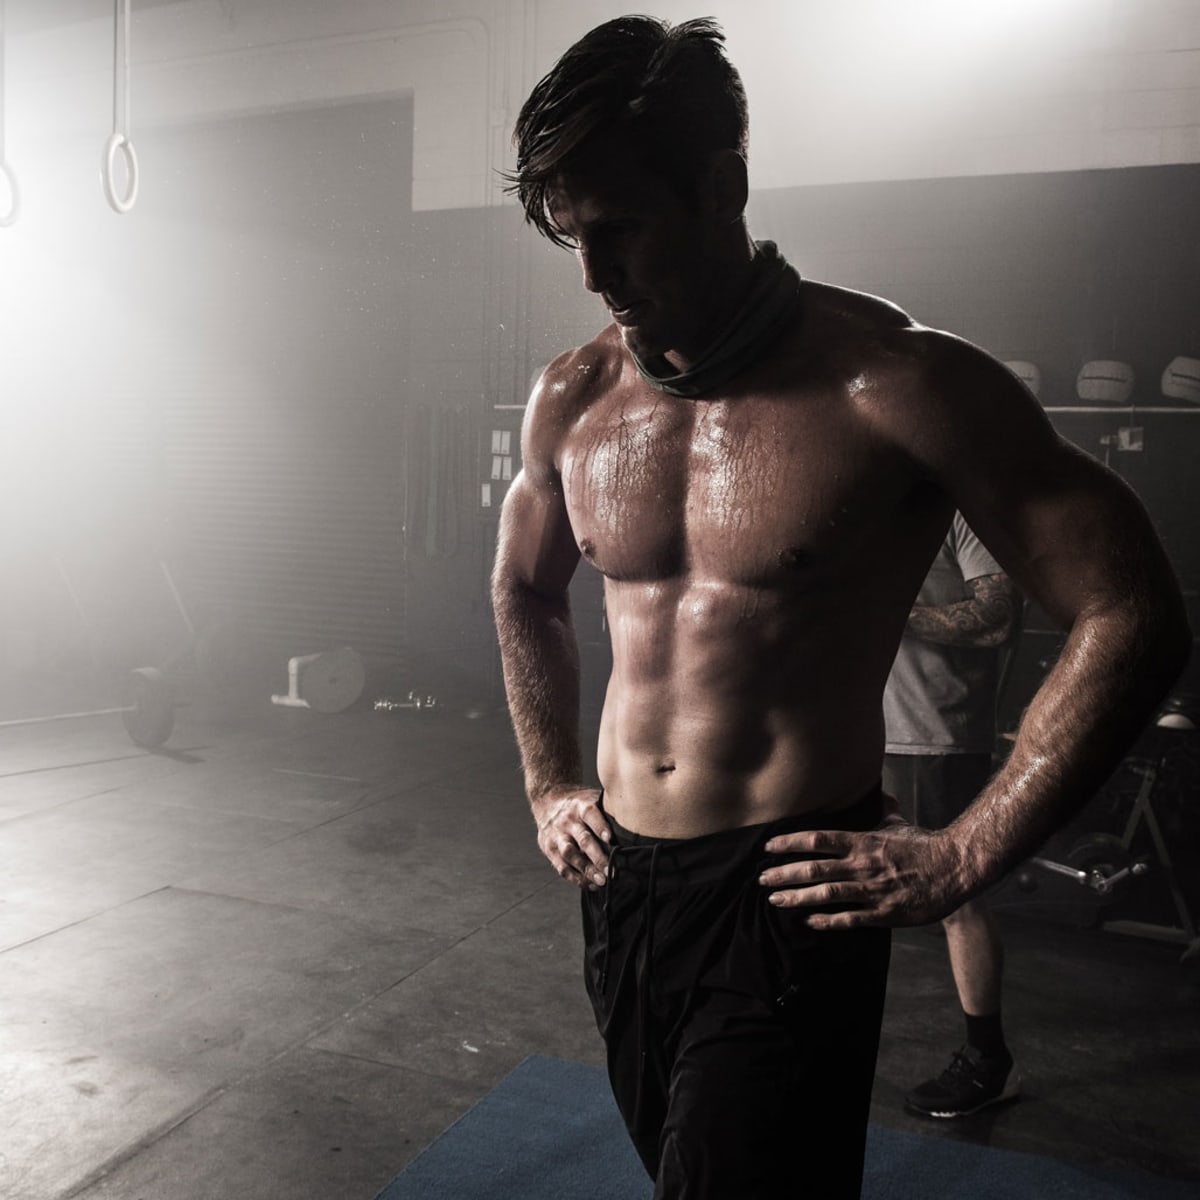 How to Get Bigger: 25 Ways to Get Big Muscles